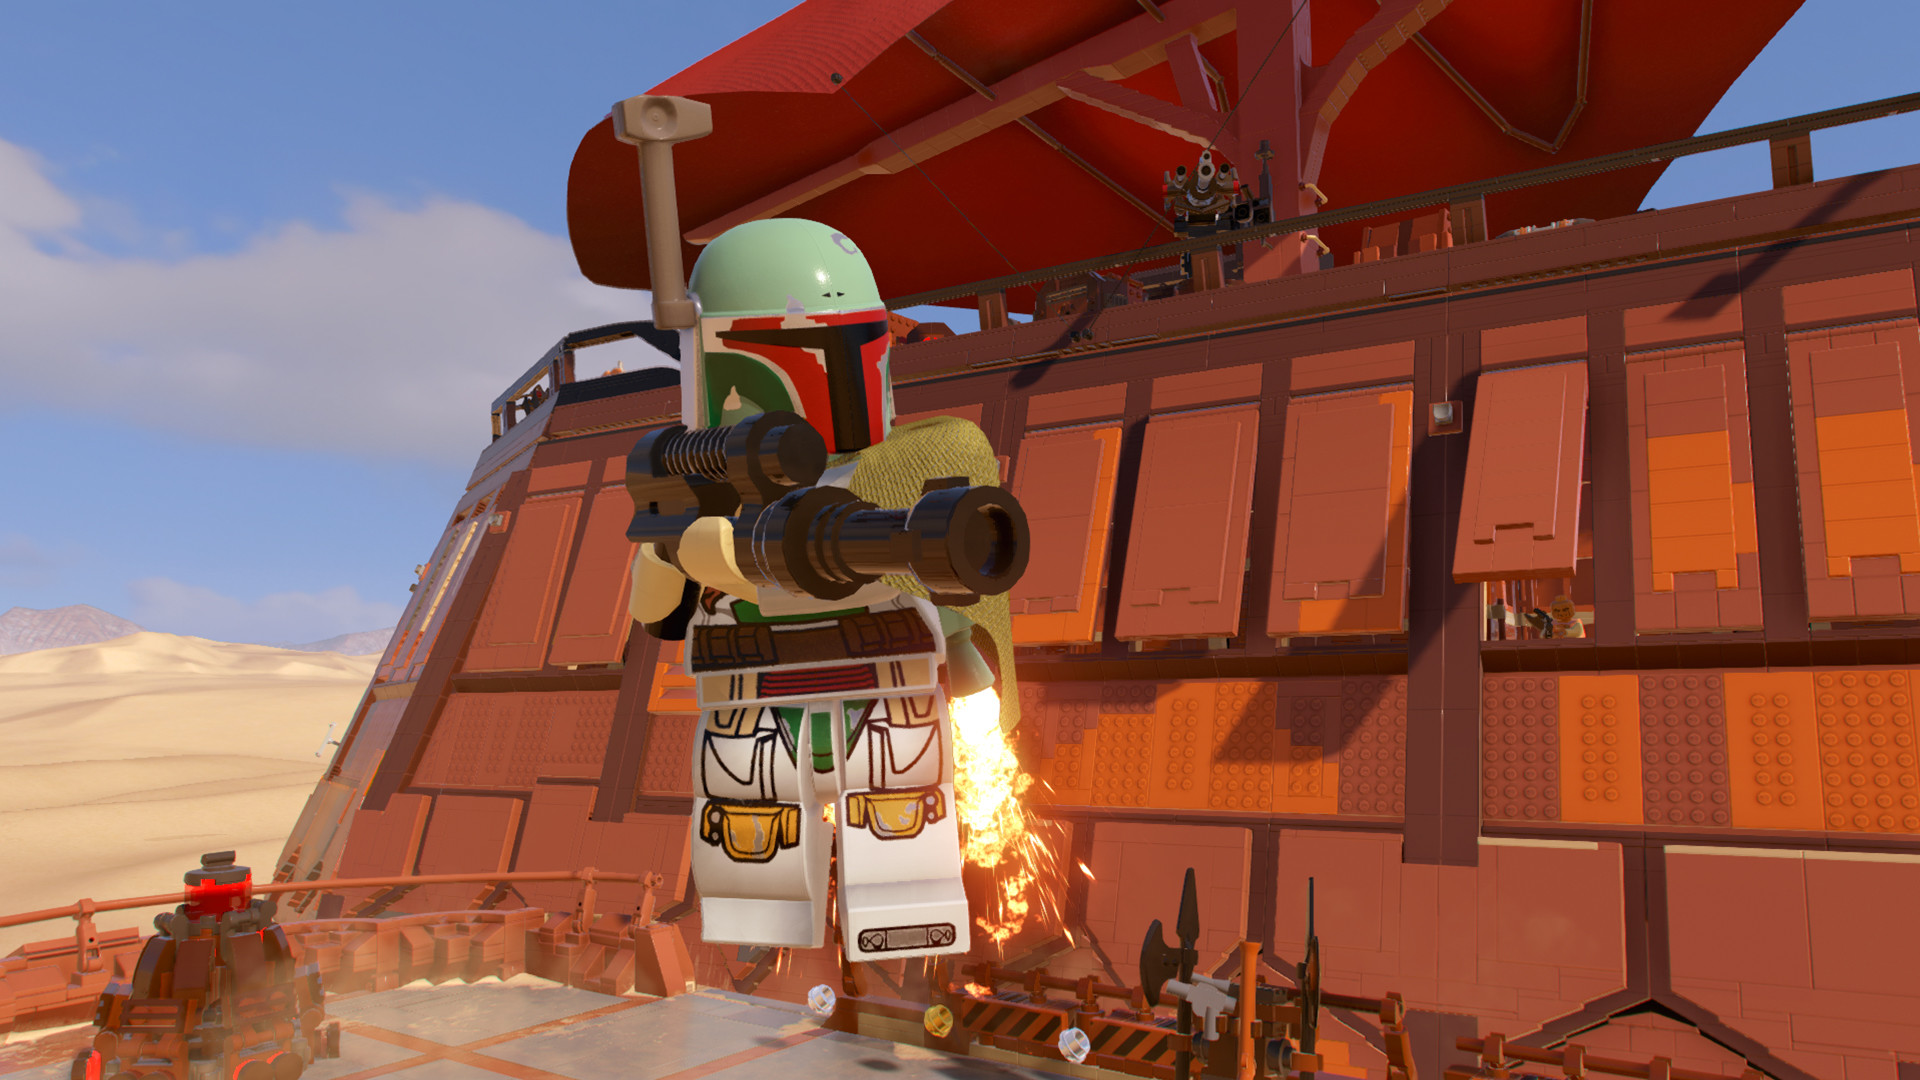 From The Phantom Menace To Rise of Skywalker, This LEGO Star Wars: The Skywalker Saga Has Them All